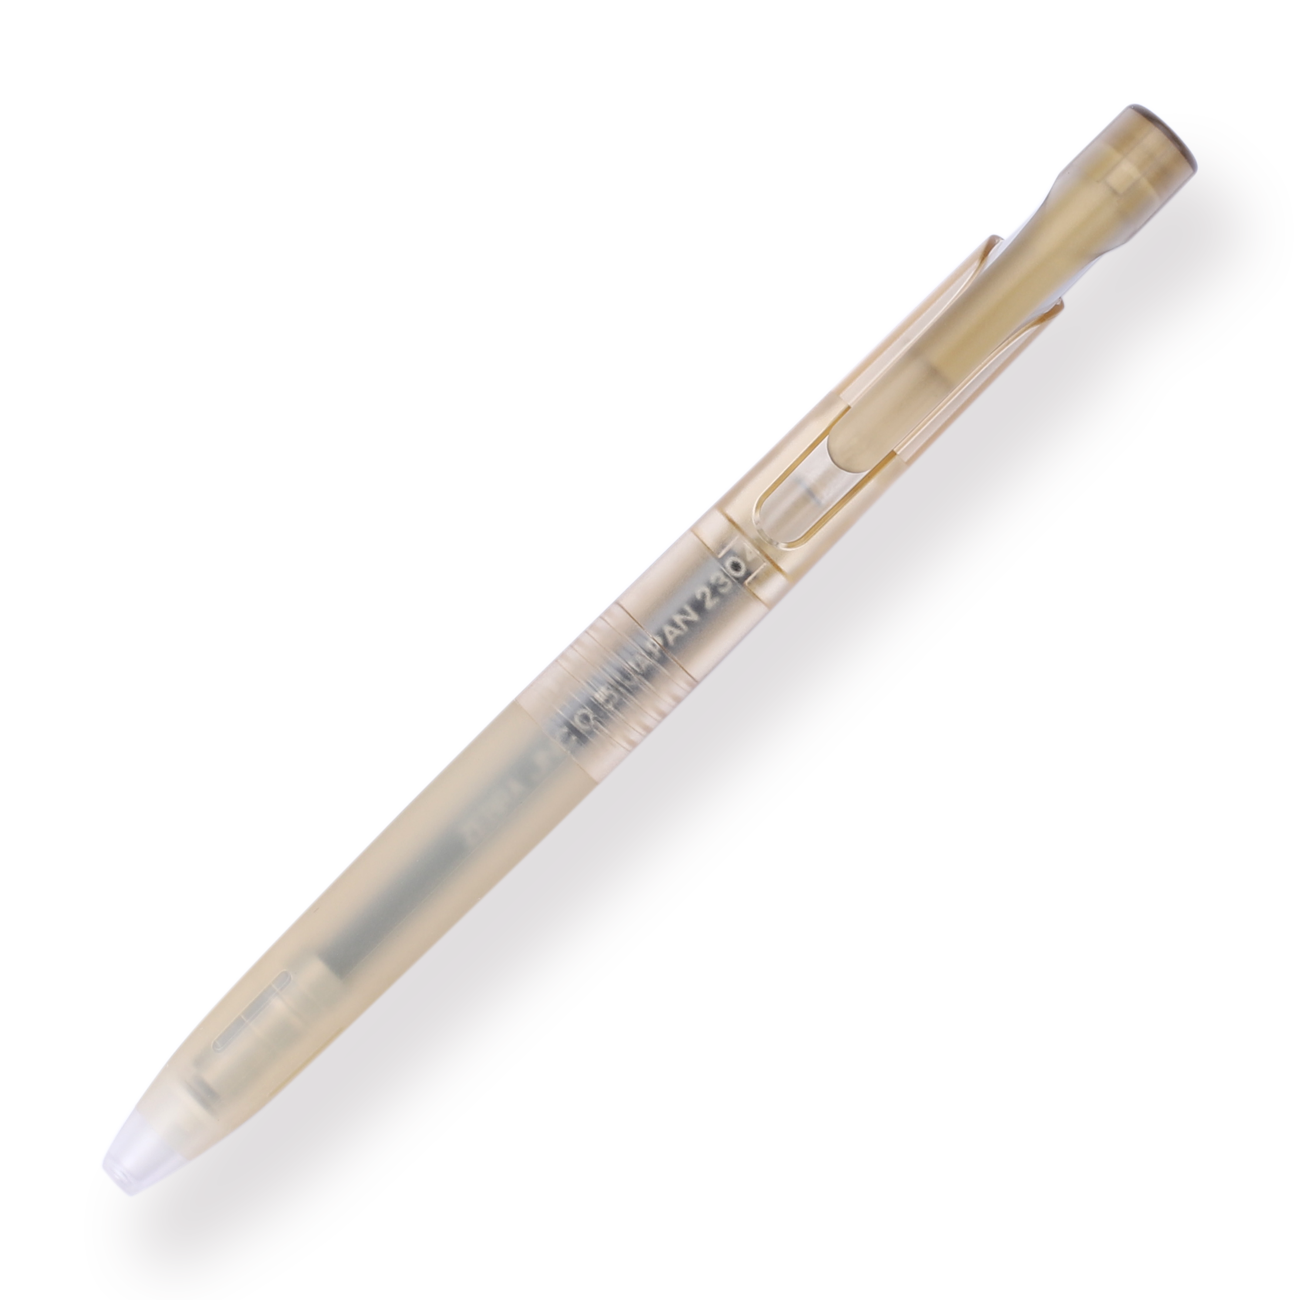 Zebra bLen Limited Edition Retractable Gel Pen - The Clear Nuance Color - Ochre - Stationery Pal